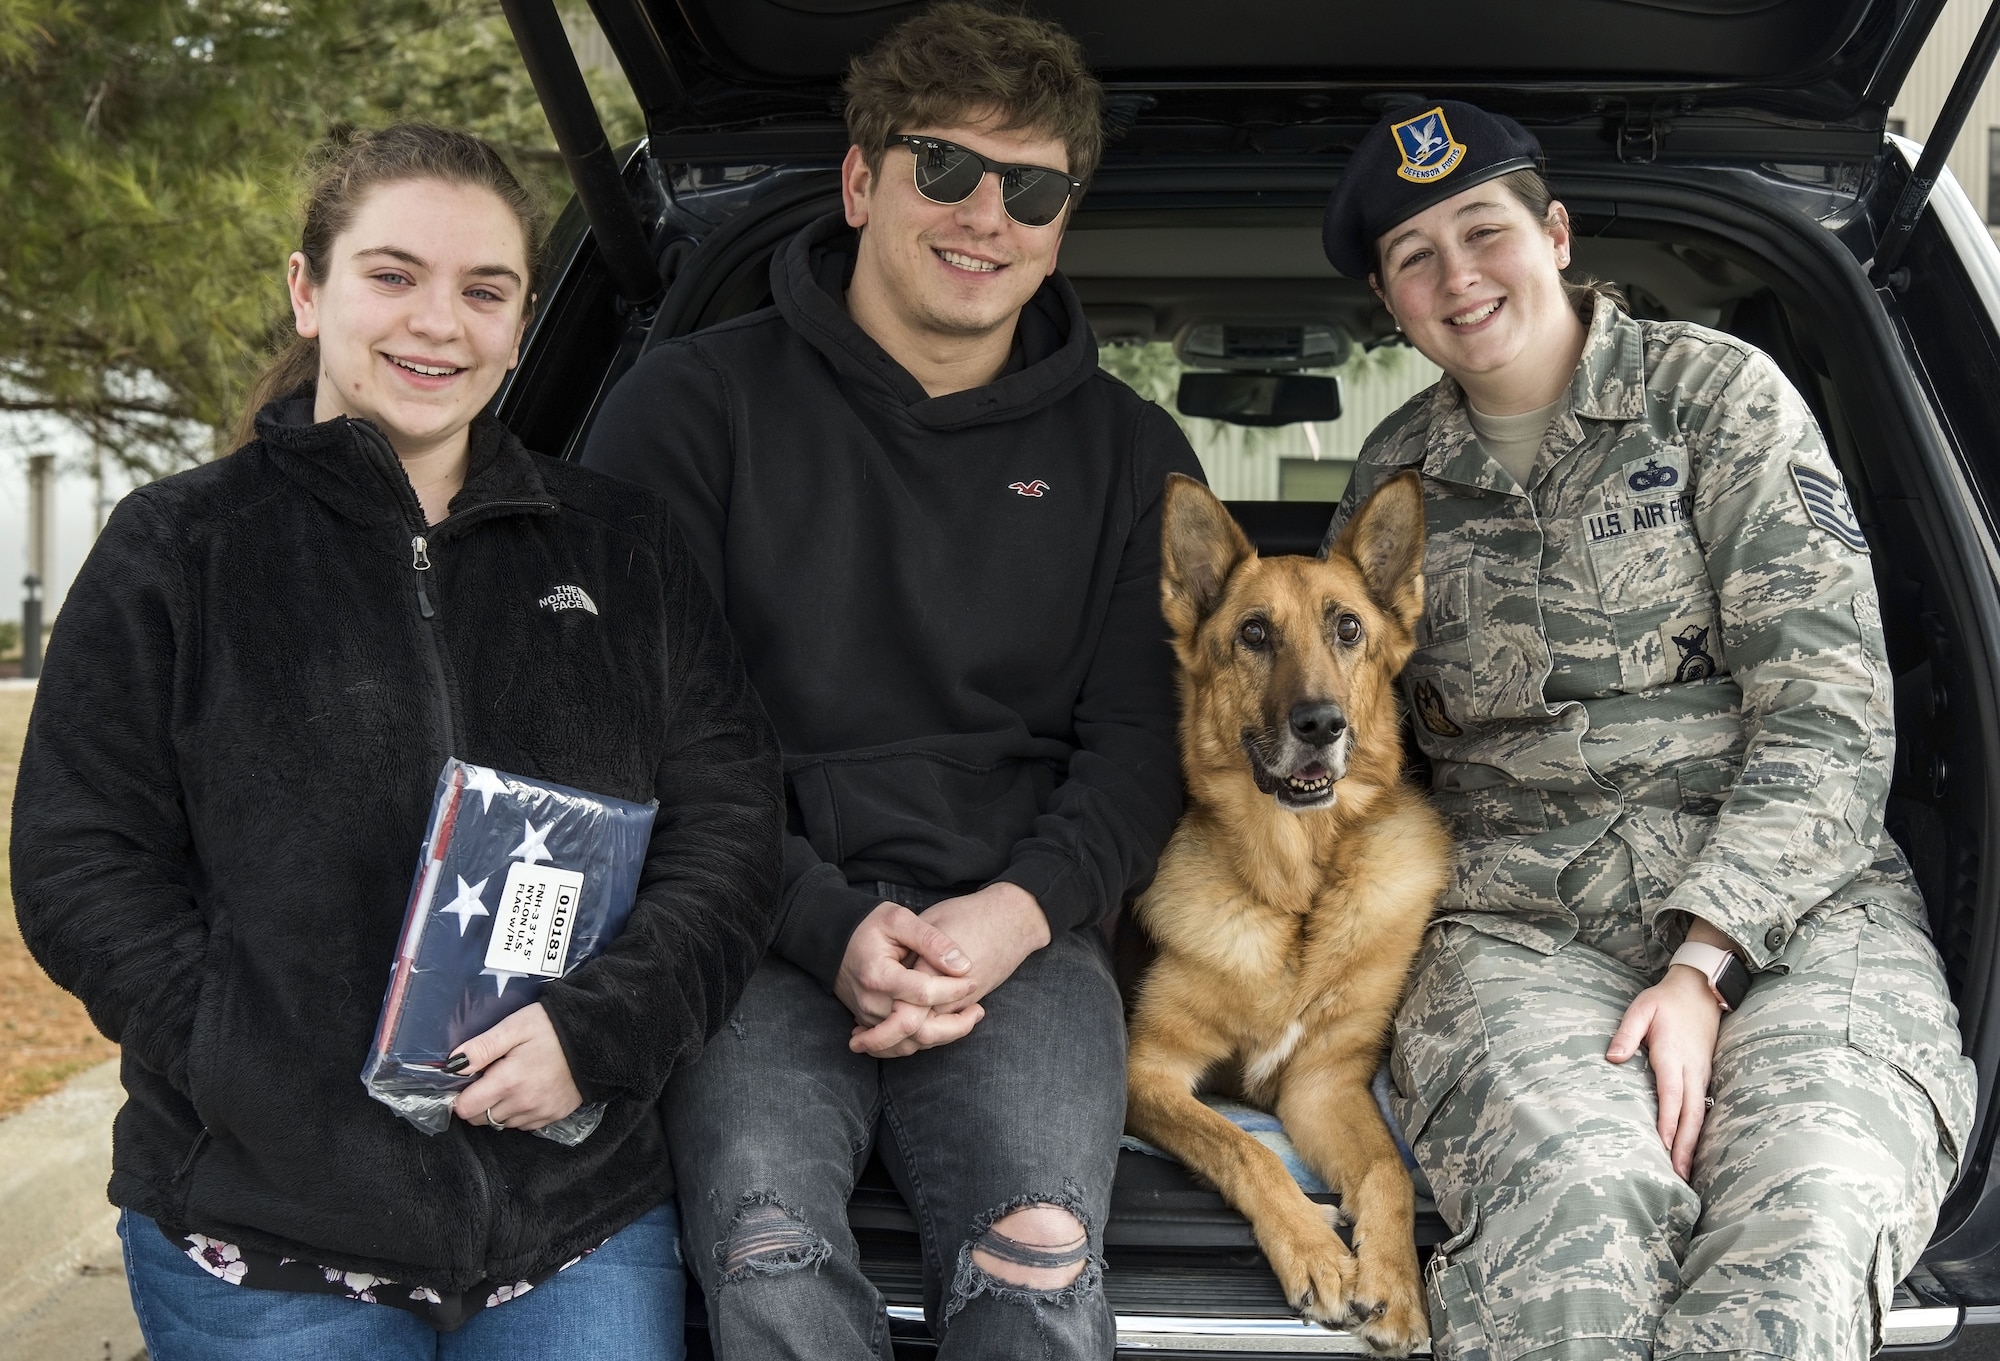 Mya Spangenberg along with her father, retired Tech. Sgt. Jason Spangenberg; Tech. Sgt. Rachel Weis, 436th Airlift Wing inspector general inspections NCO in charge; and retired Military Working Dog Rico pose for a photo Jan. 24, 2018, at the Veterinary Treatment Facility on Dover Air Force Base, Del. MWD Rico was humanely euthanized shortly after being carried into the facility by Spangenberg, his owner. (U.S. Air Force photo by Roland Balik)